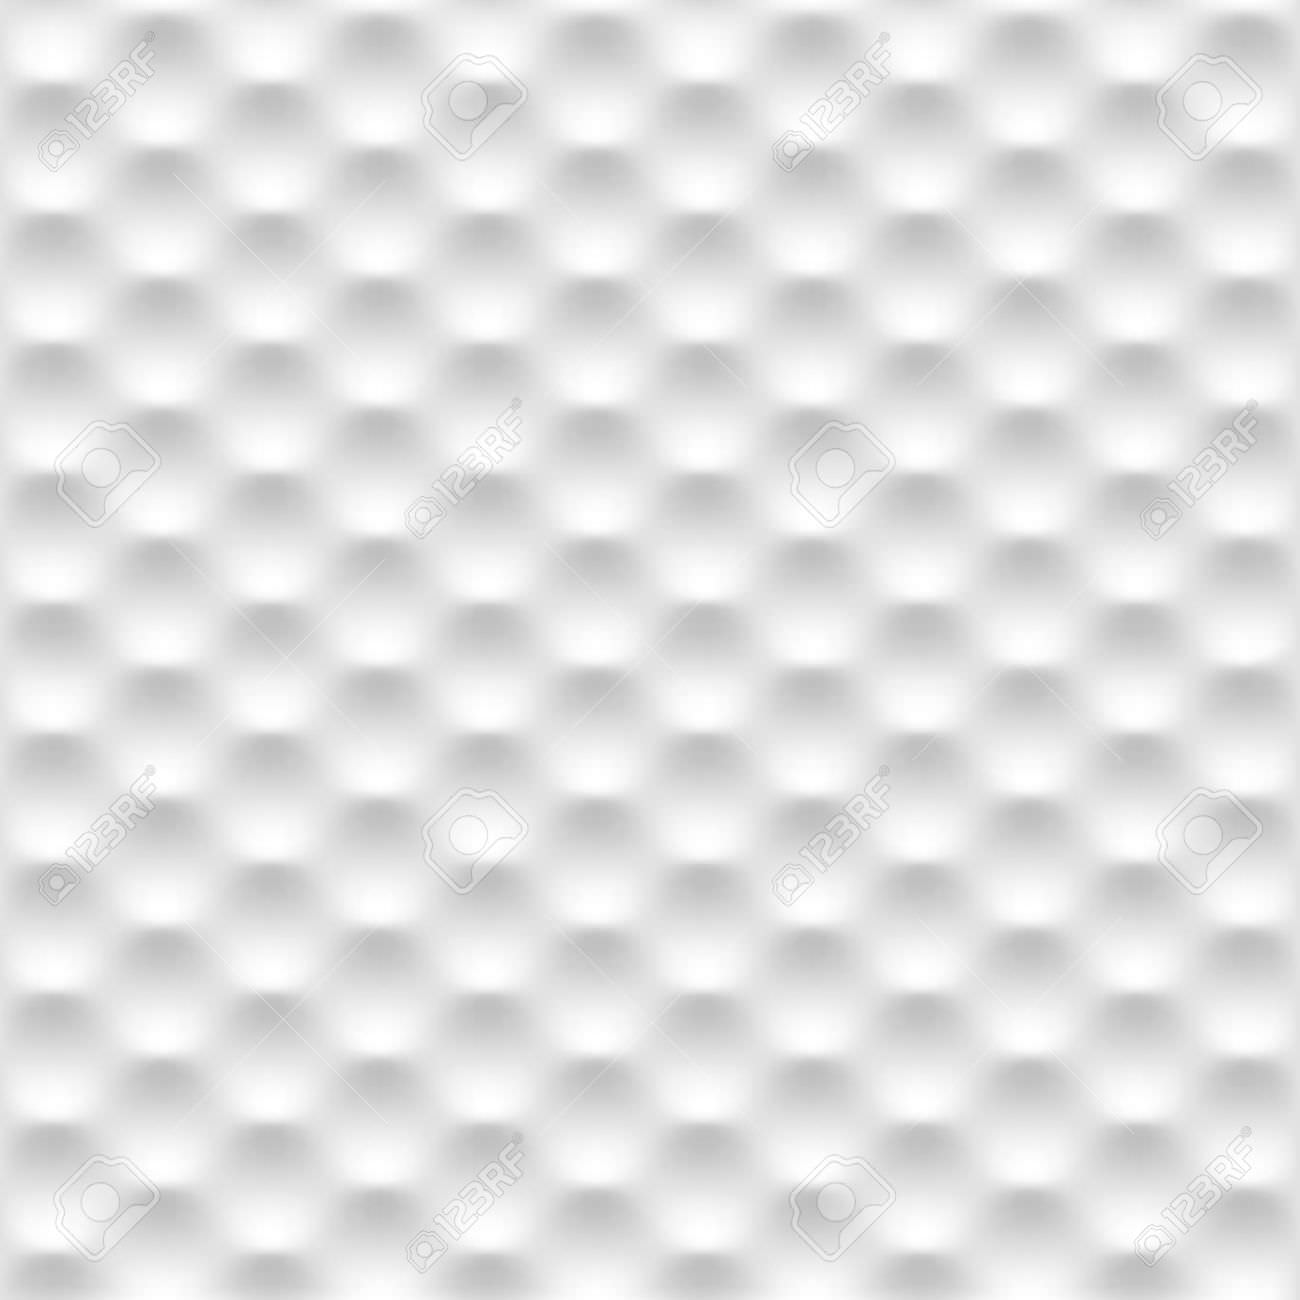 abstract white pattern